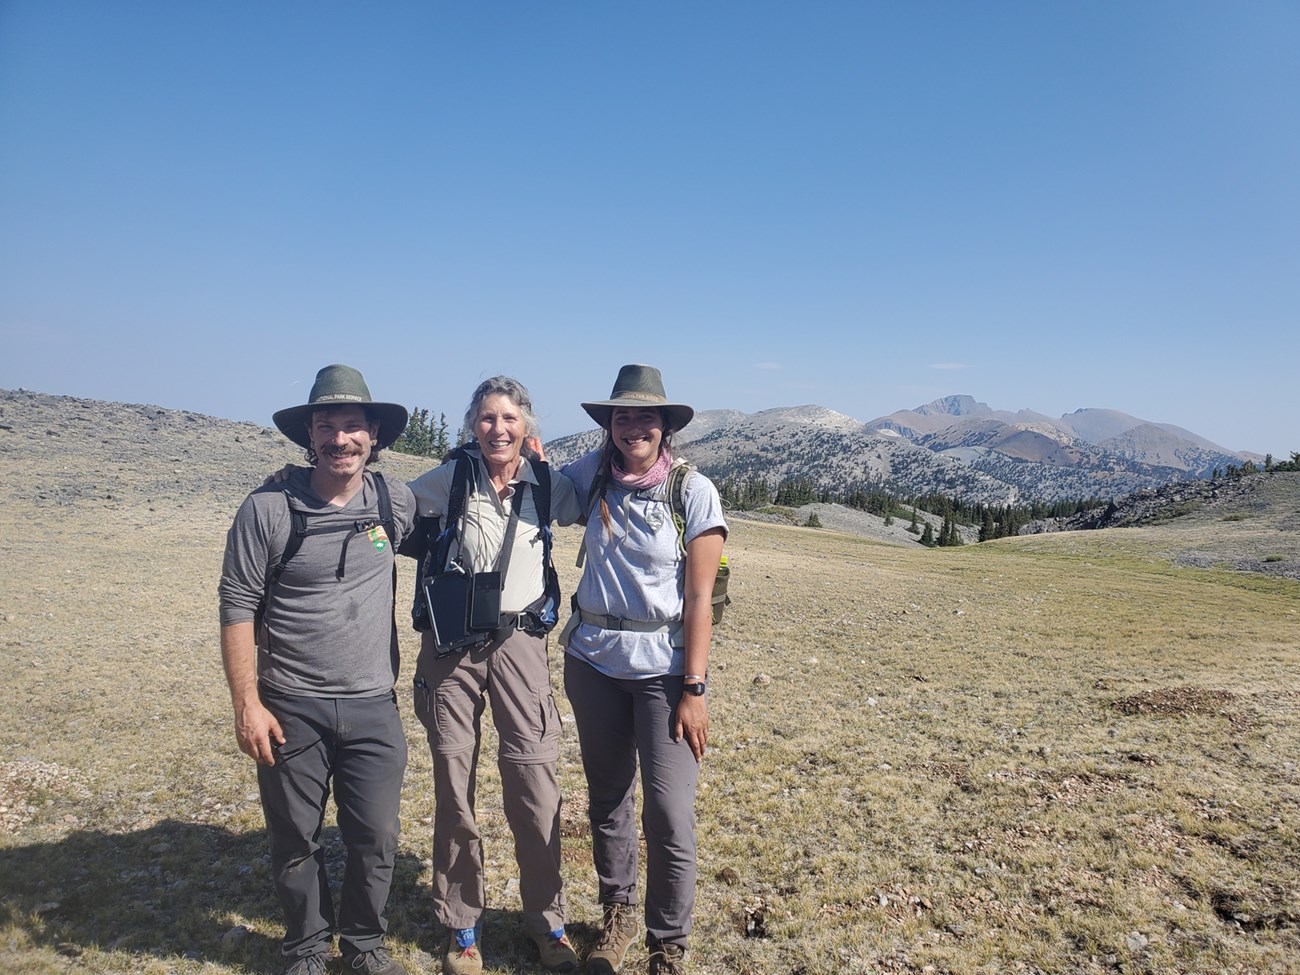 Three researchers who are part of the alpine plant survey crew.